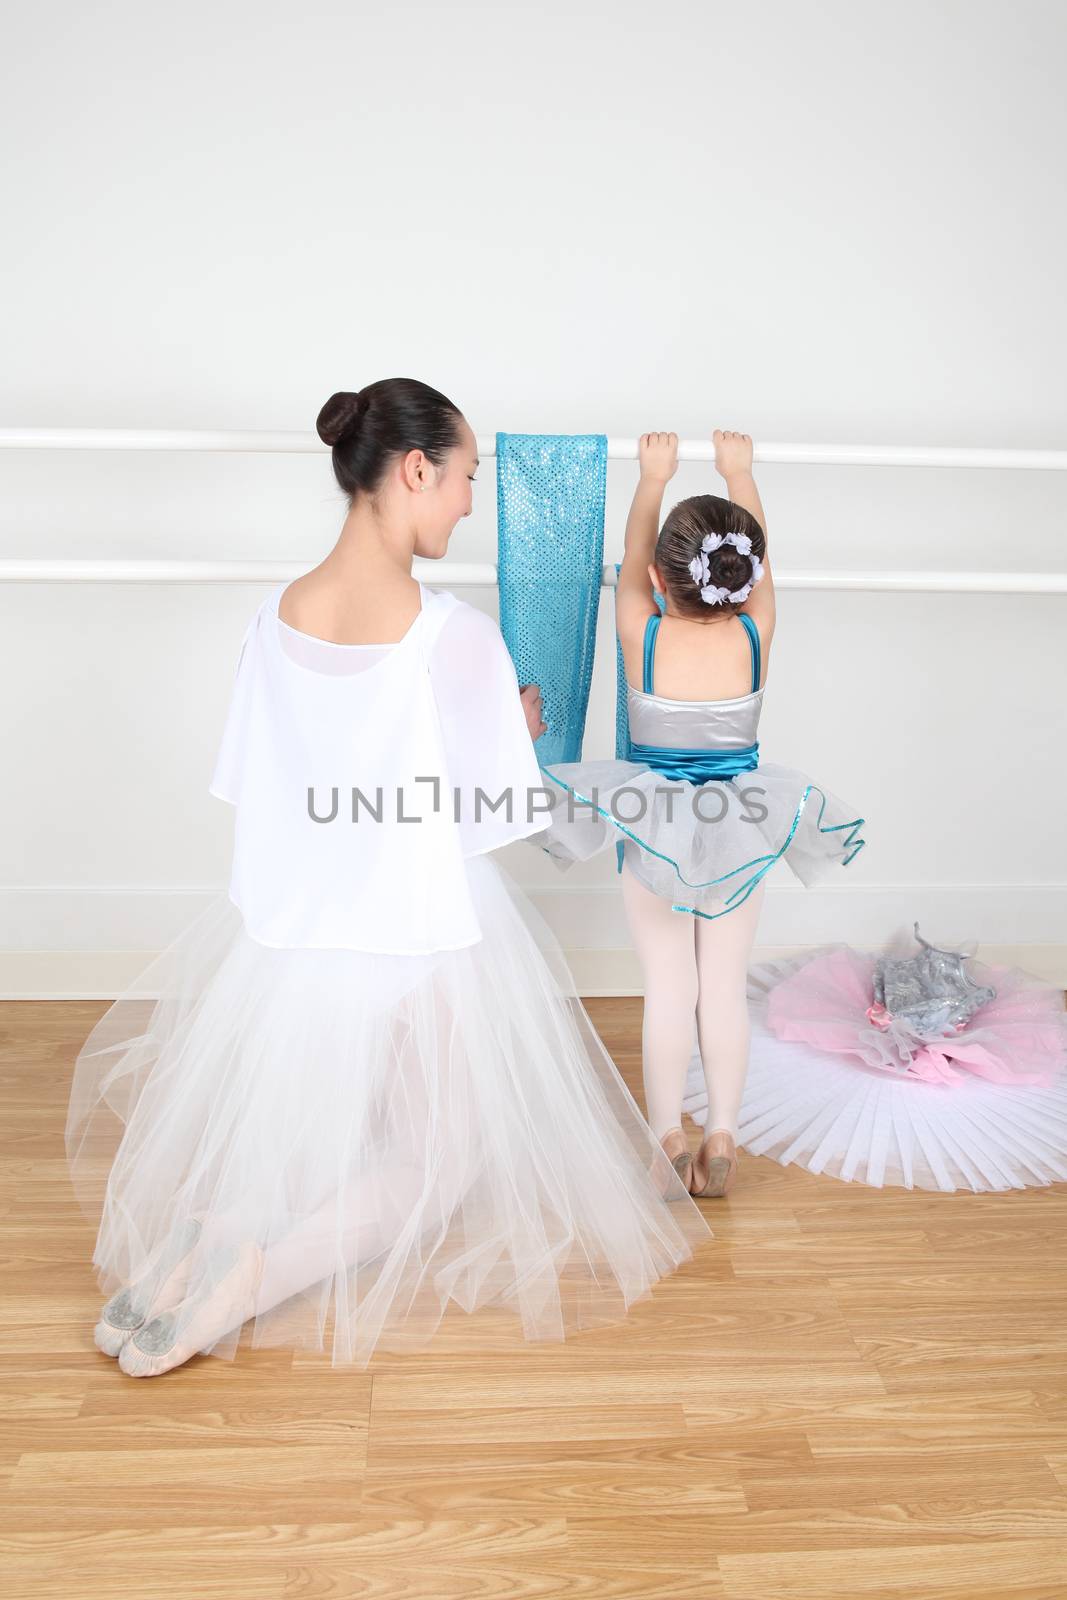 Teen dancer and toddler in costume at dance studio